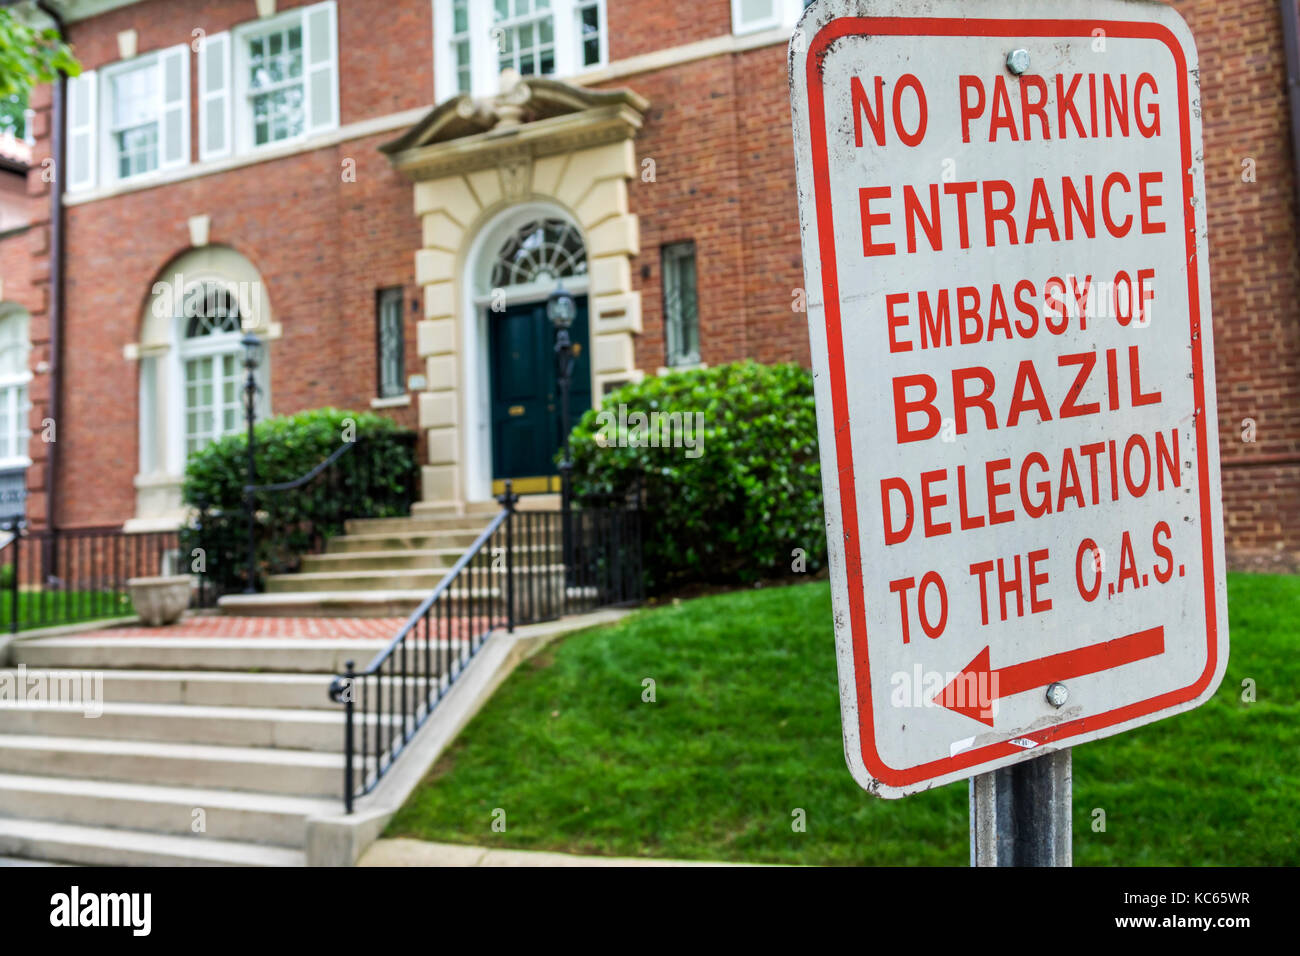 Washington DC,Kalorama Heights,Embassy Row,diplomatic building,restricted parking,sign,Embassy of Brazil delegation to OAS,DC170525054 Stock Photo